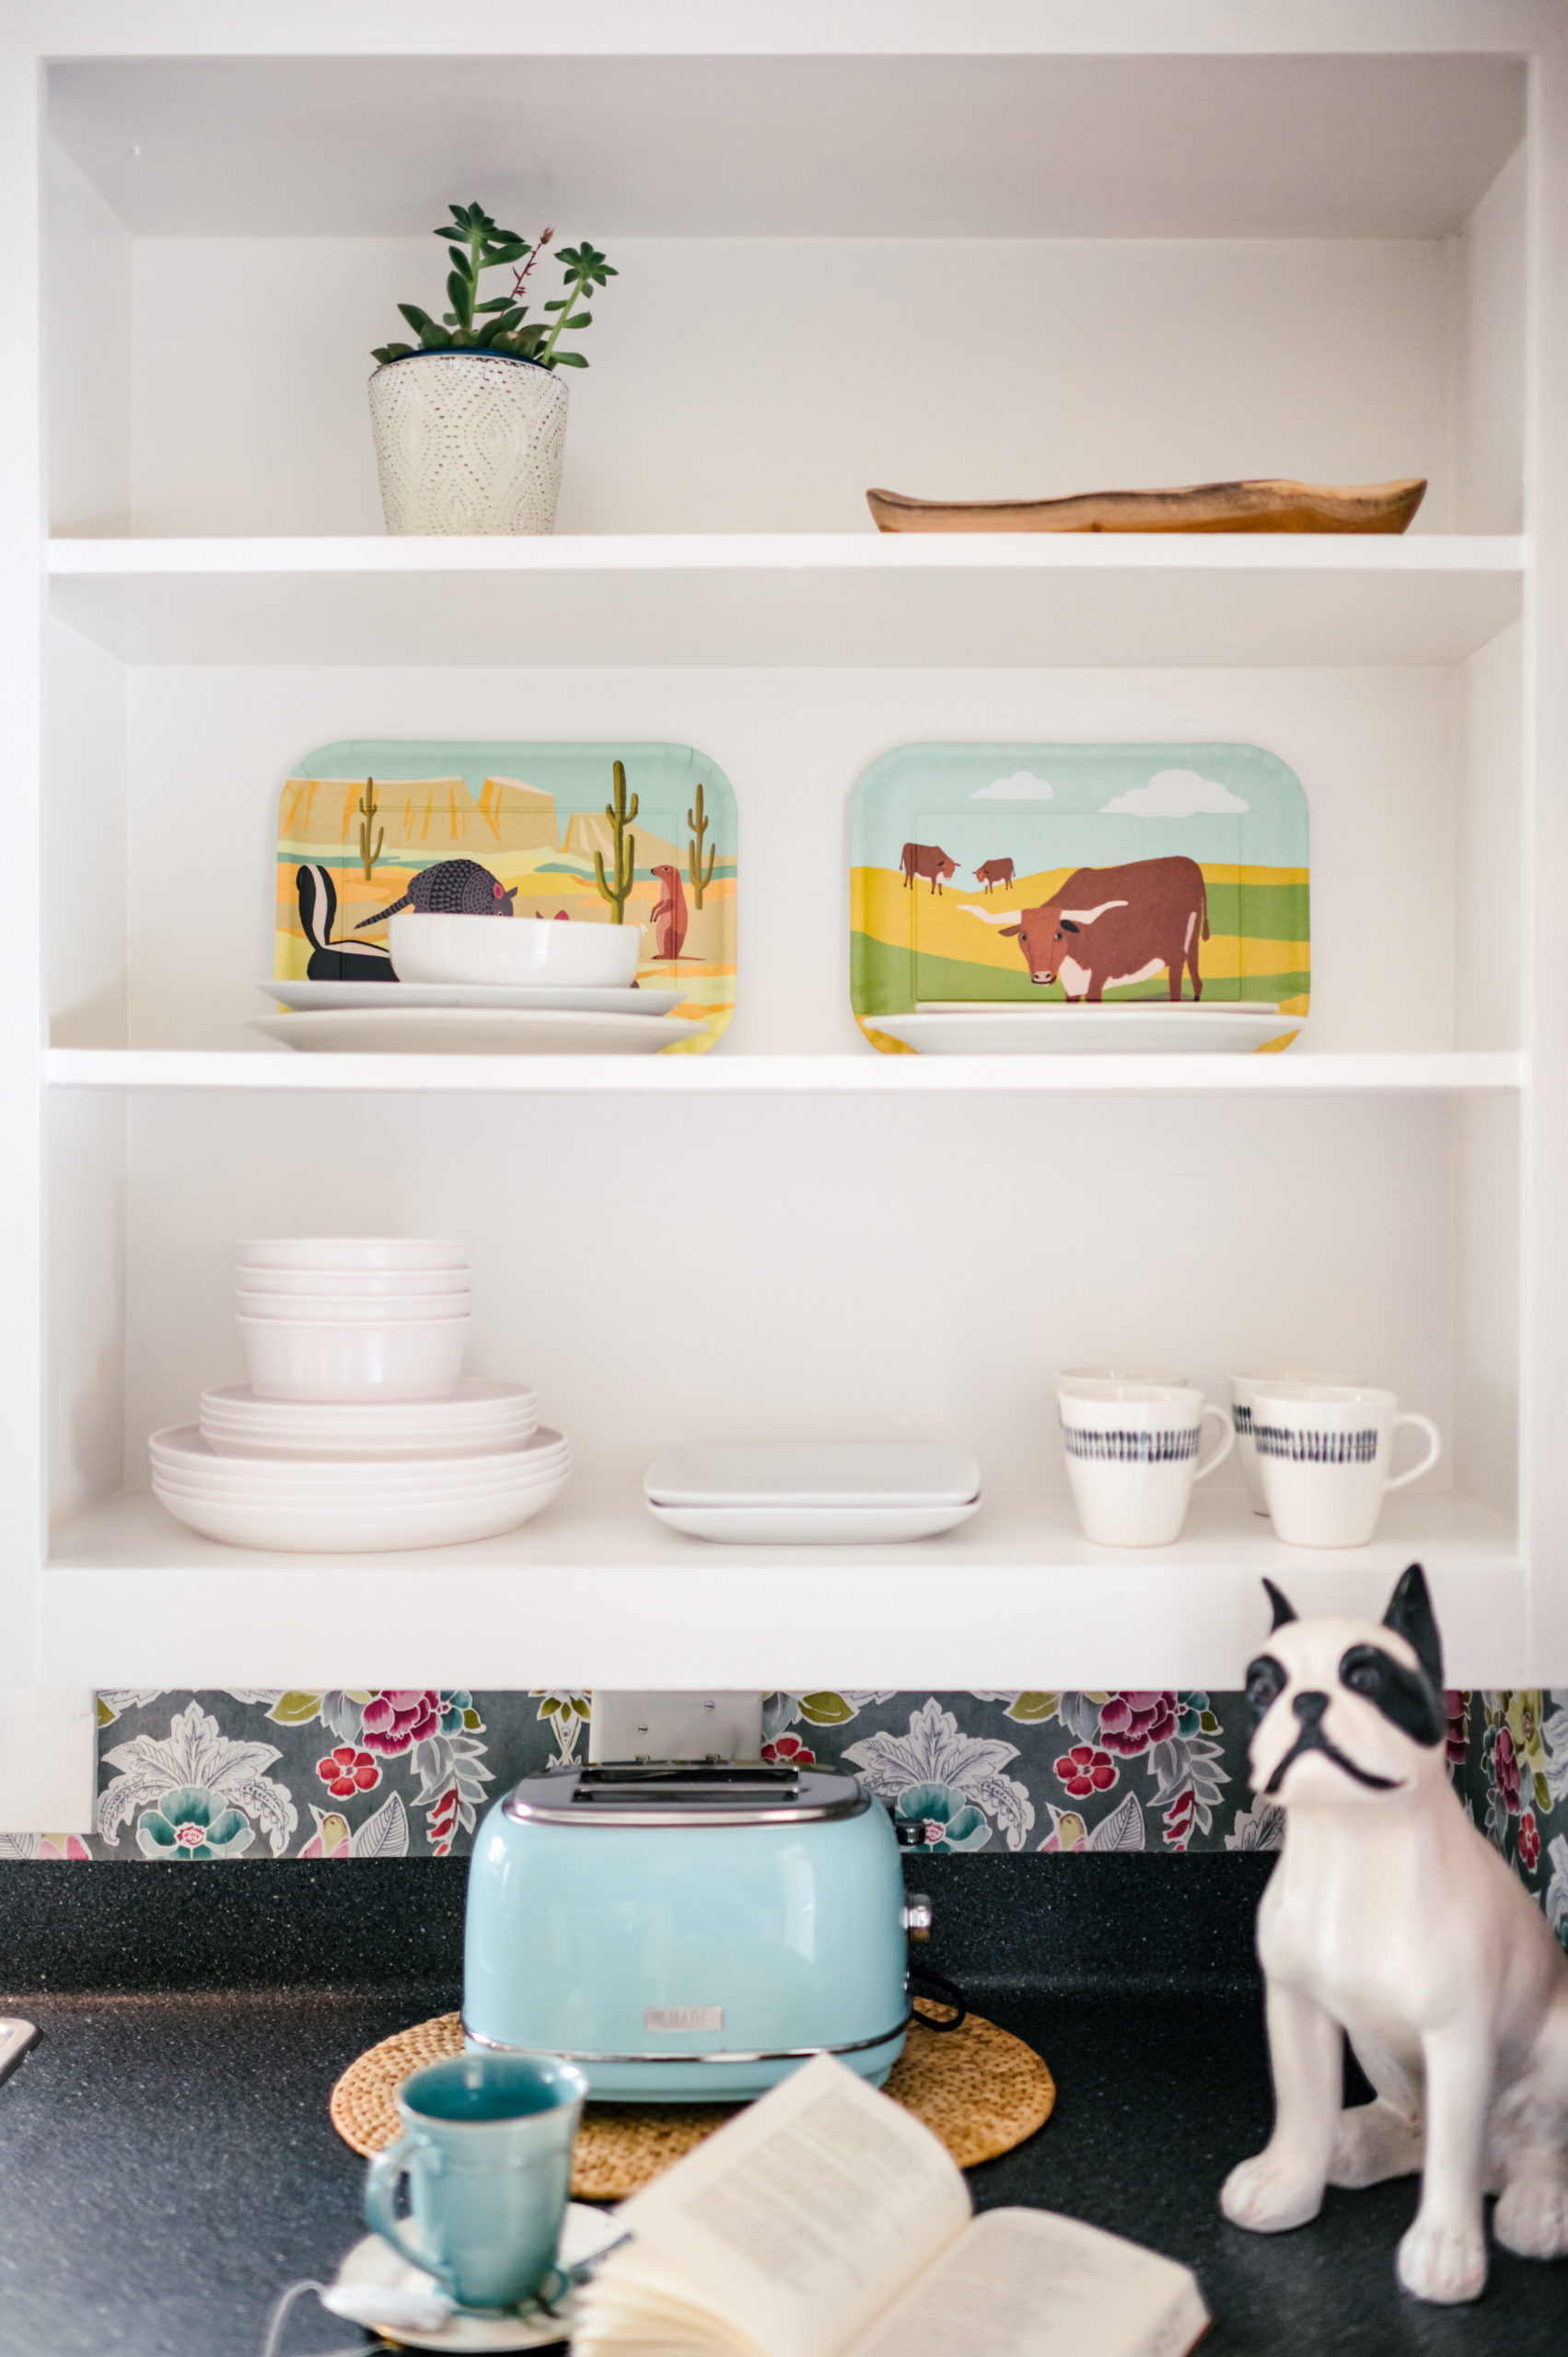 Kitchen shelving with dishware and countertop with a blue toaster and puppy figurine